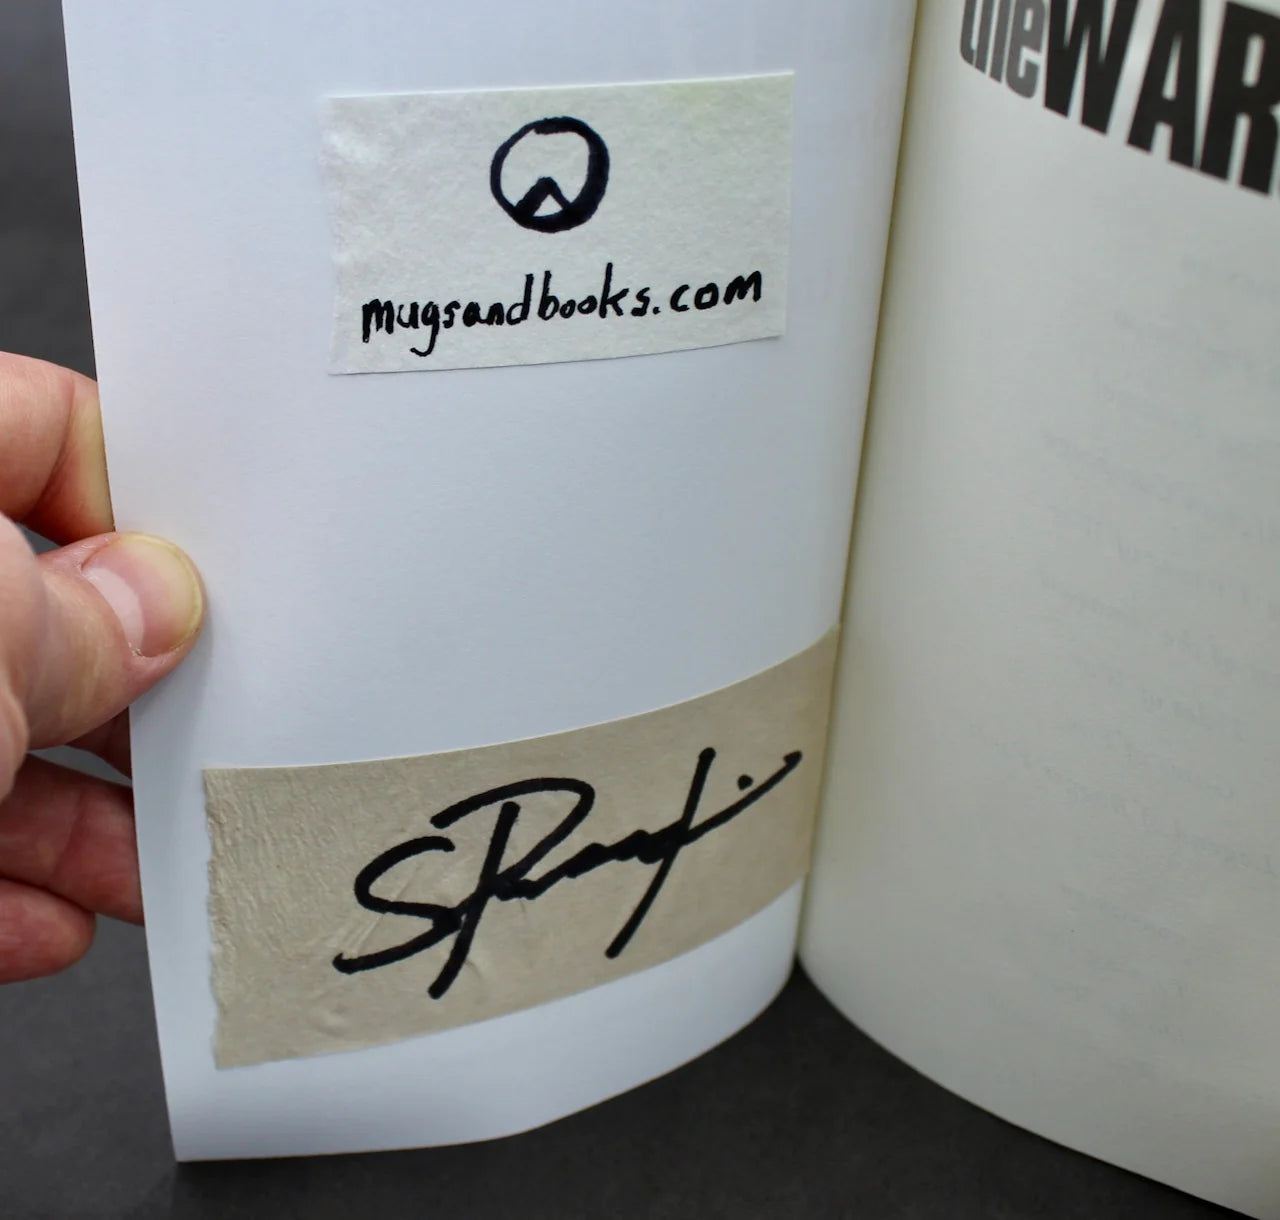 One Bullet Flower Mug and Autographed Book, "The War of Art" by Steven Pressfield (SK7801)